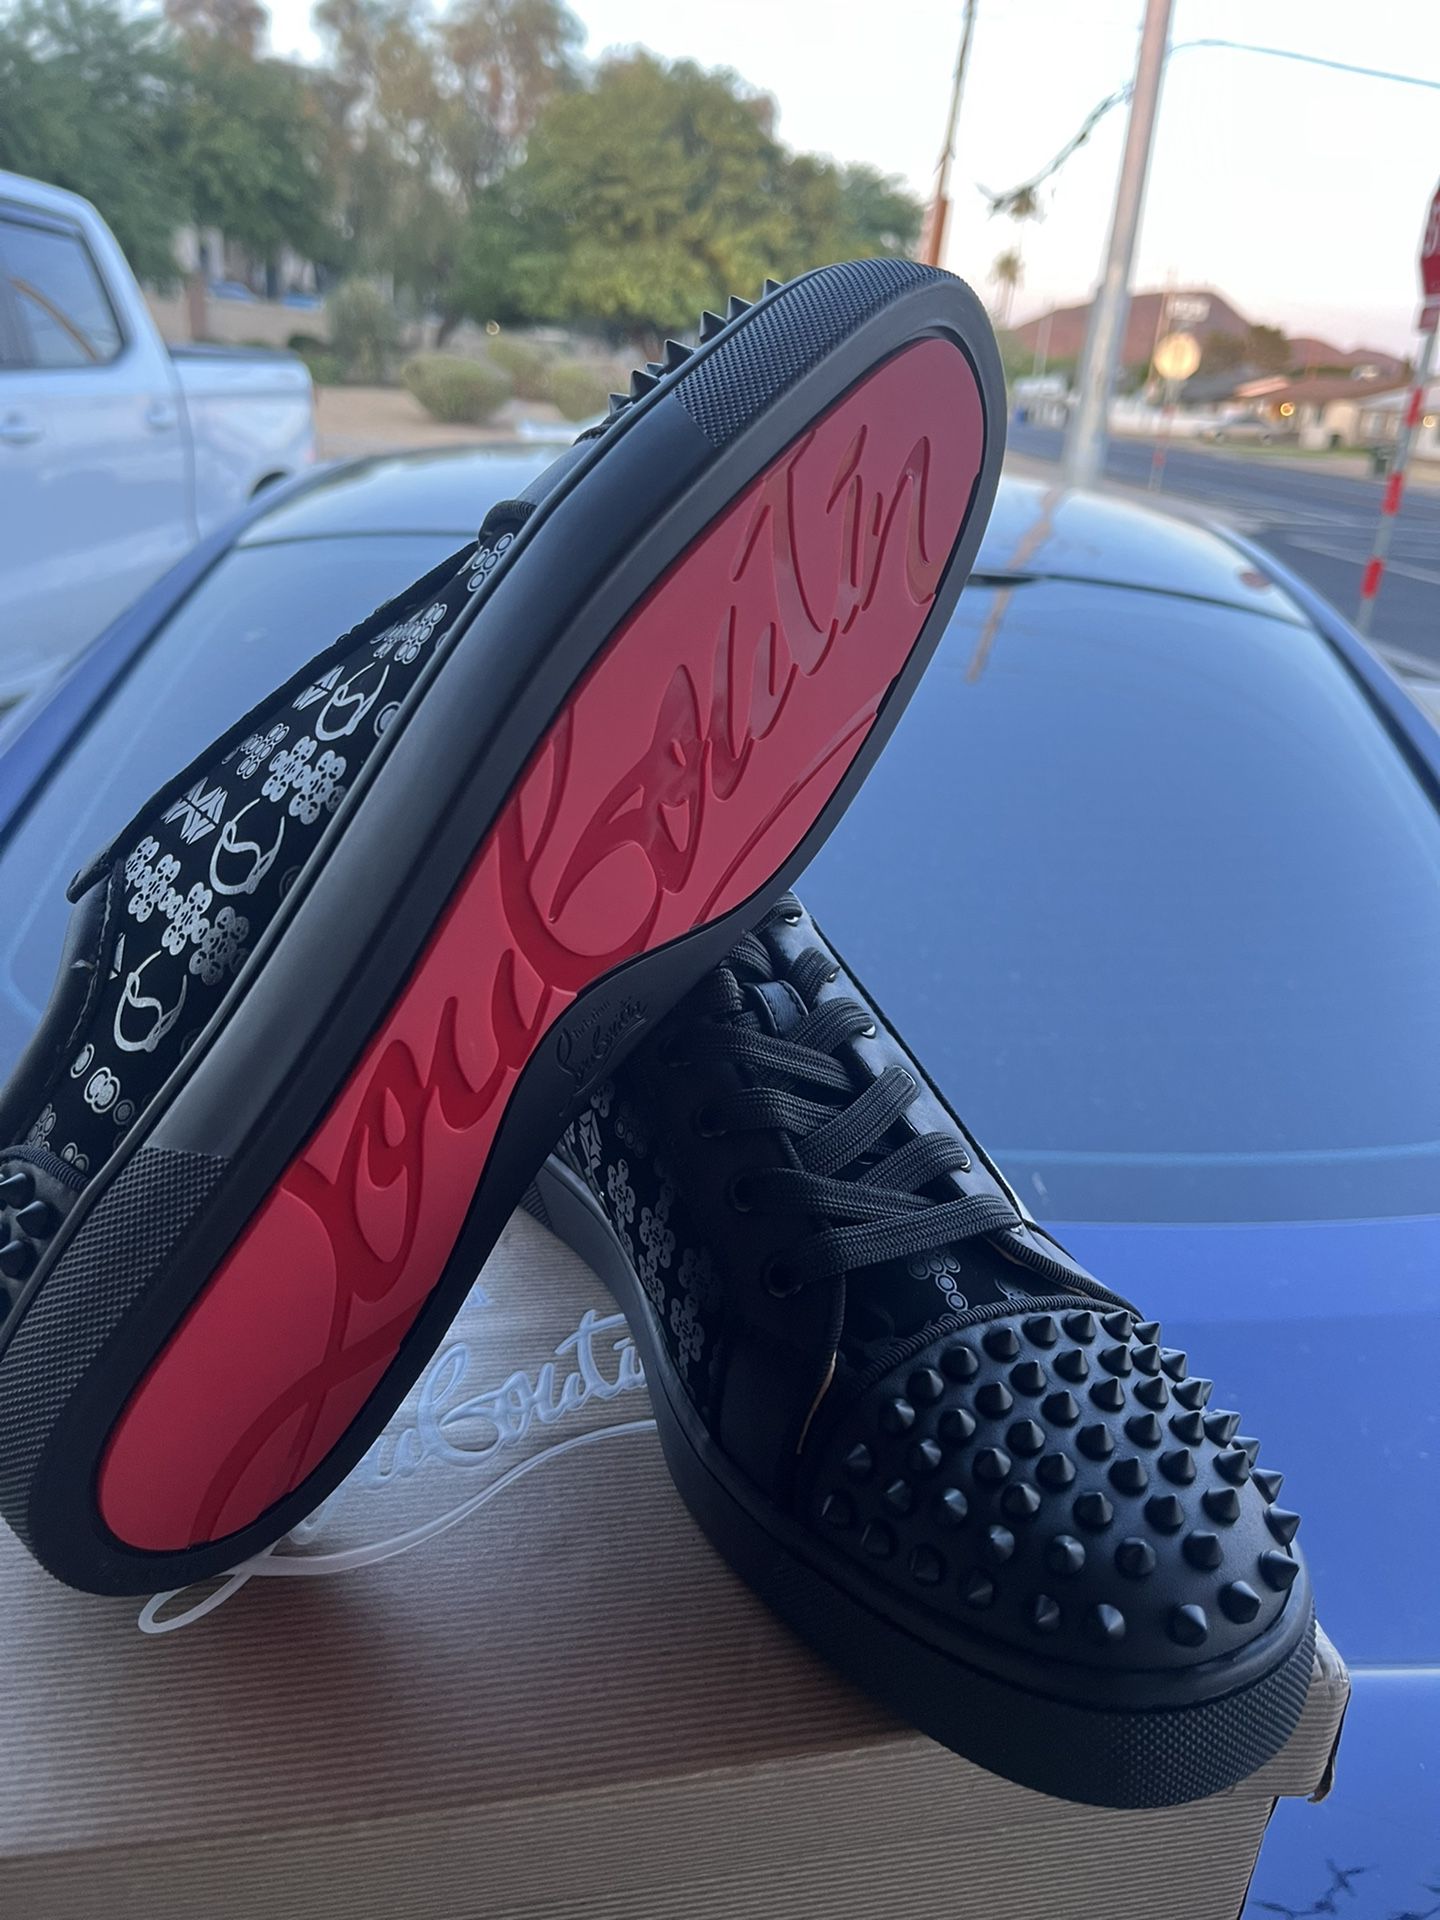 Christian Louboutins red bottoms for Sale in Mesa, AZ - OfferUp